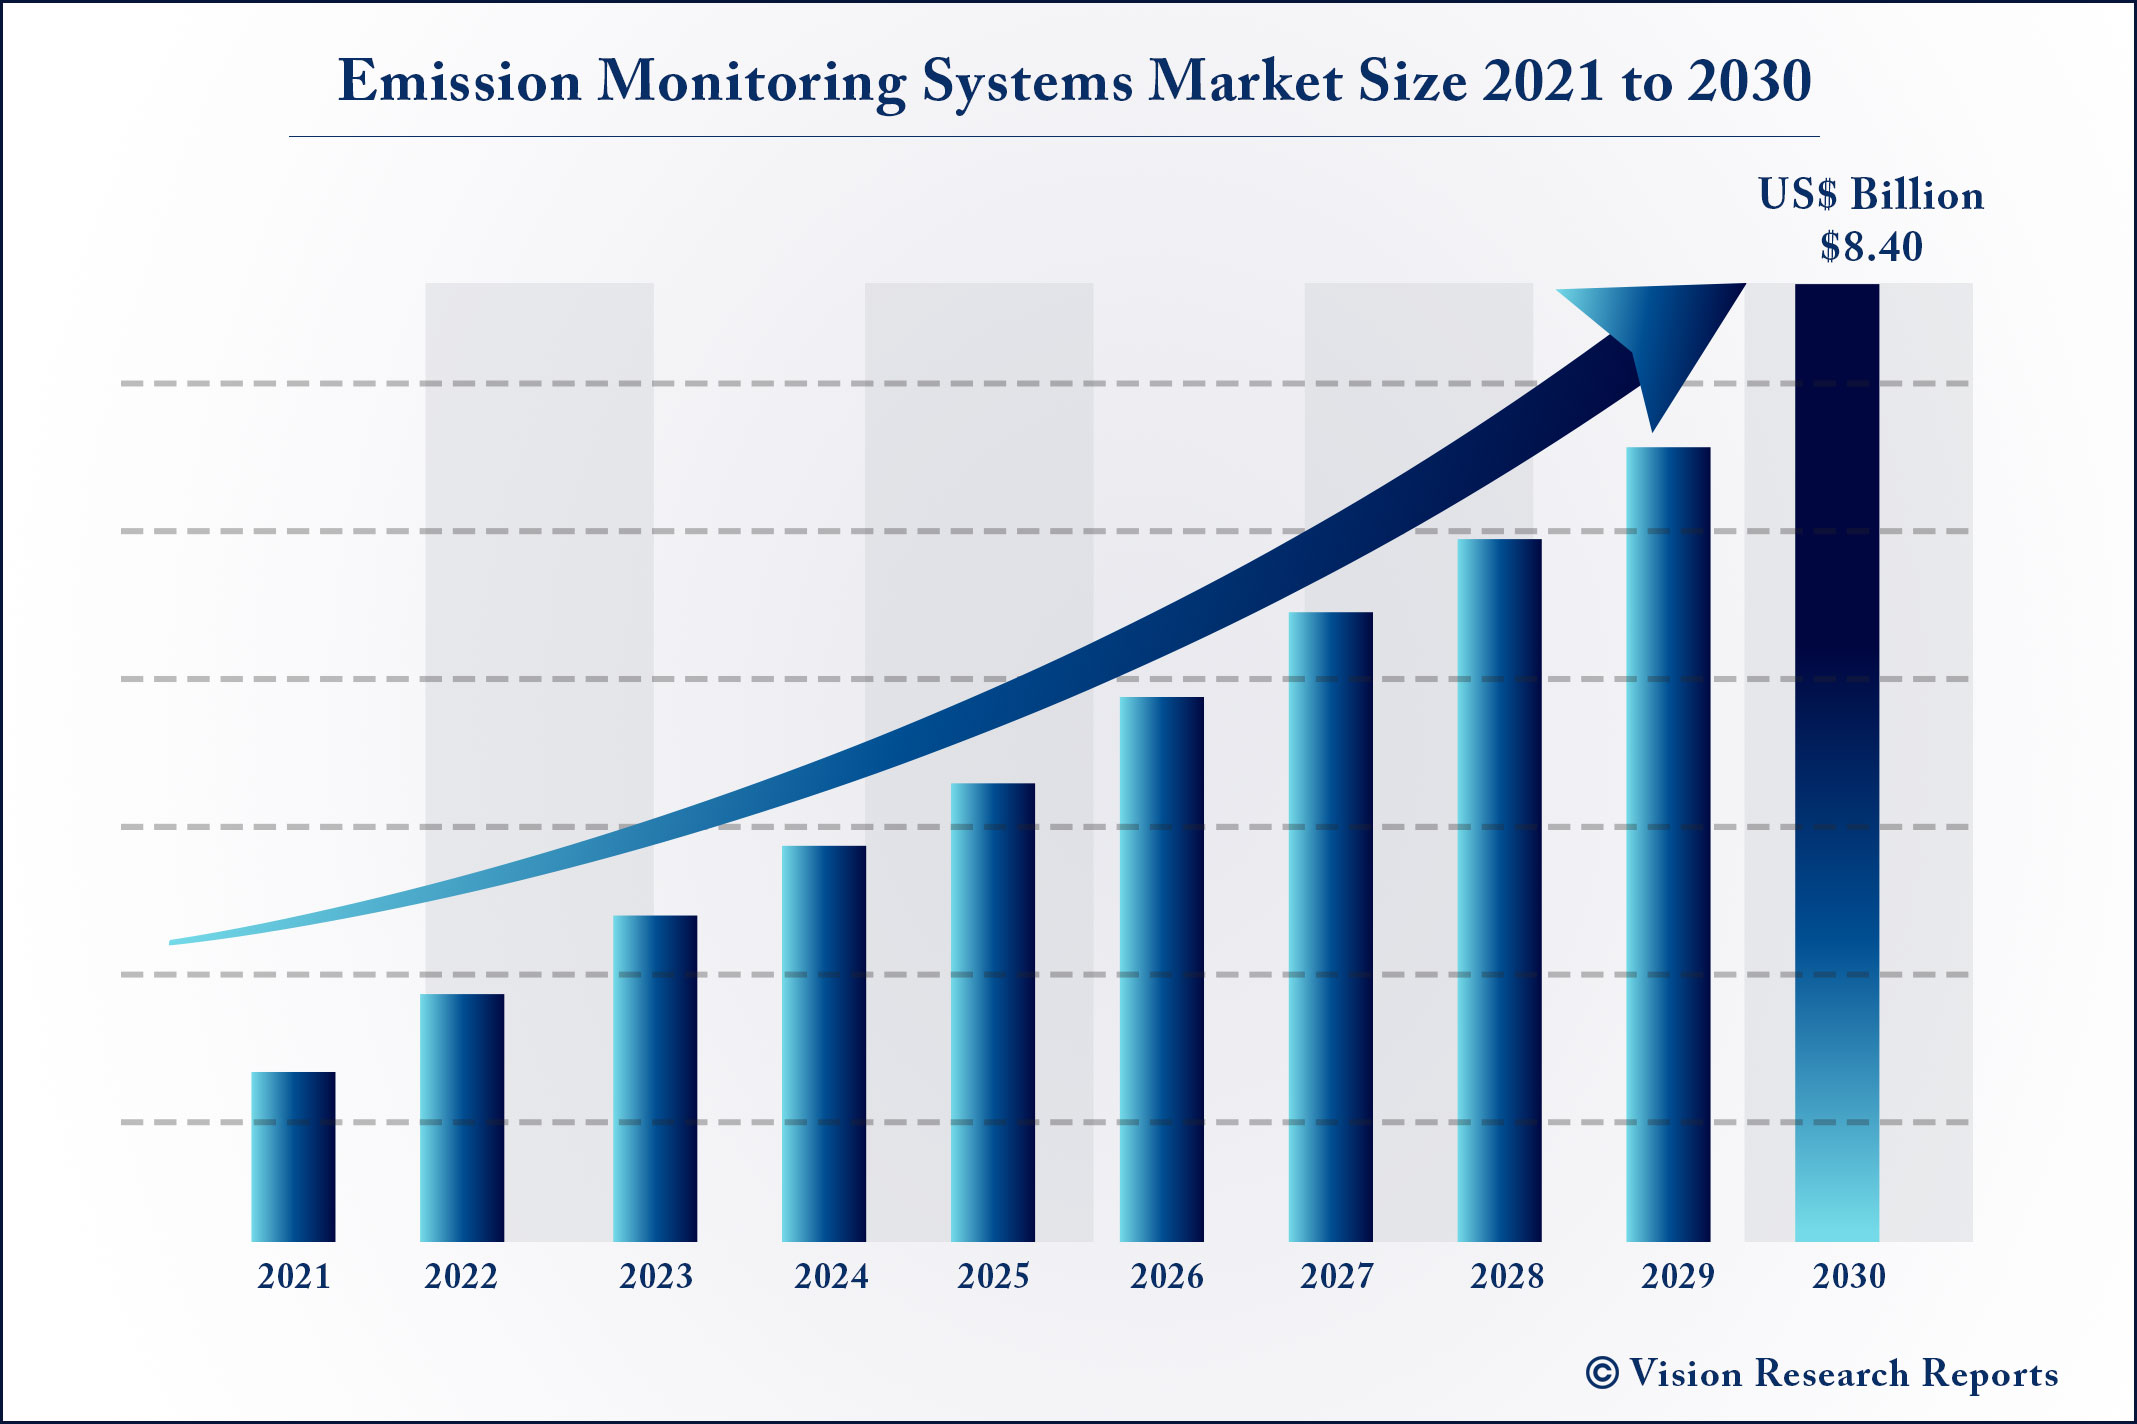 Emission Monitoring Systems Market Size 2021 to 2030